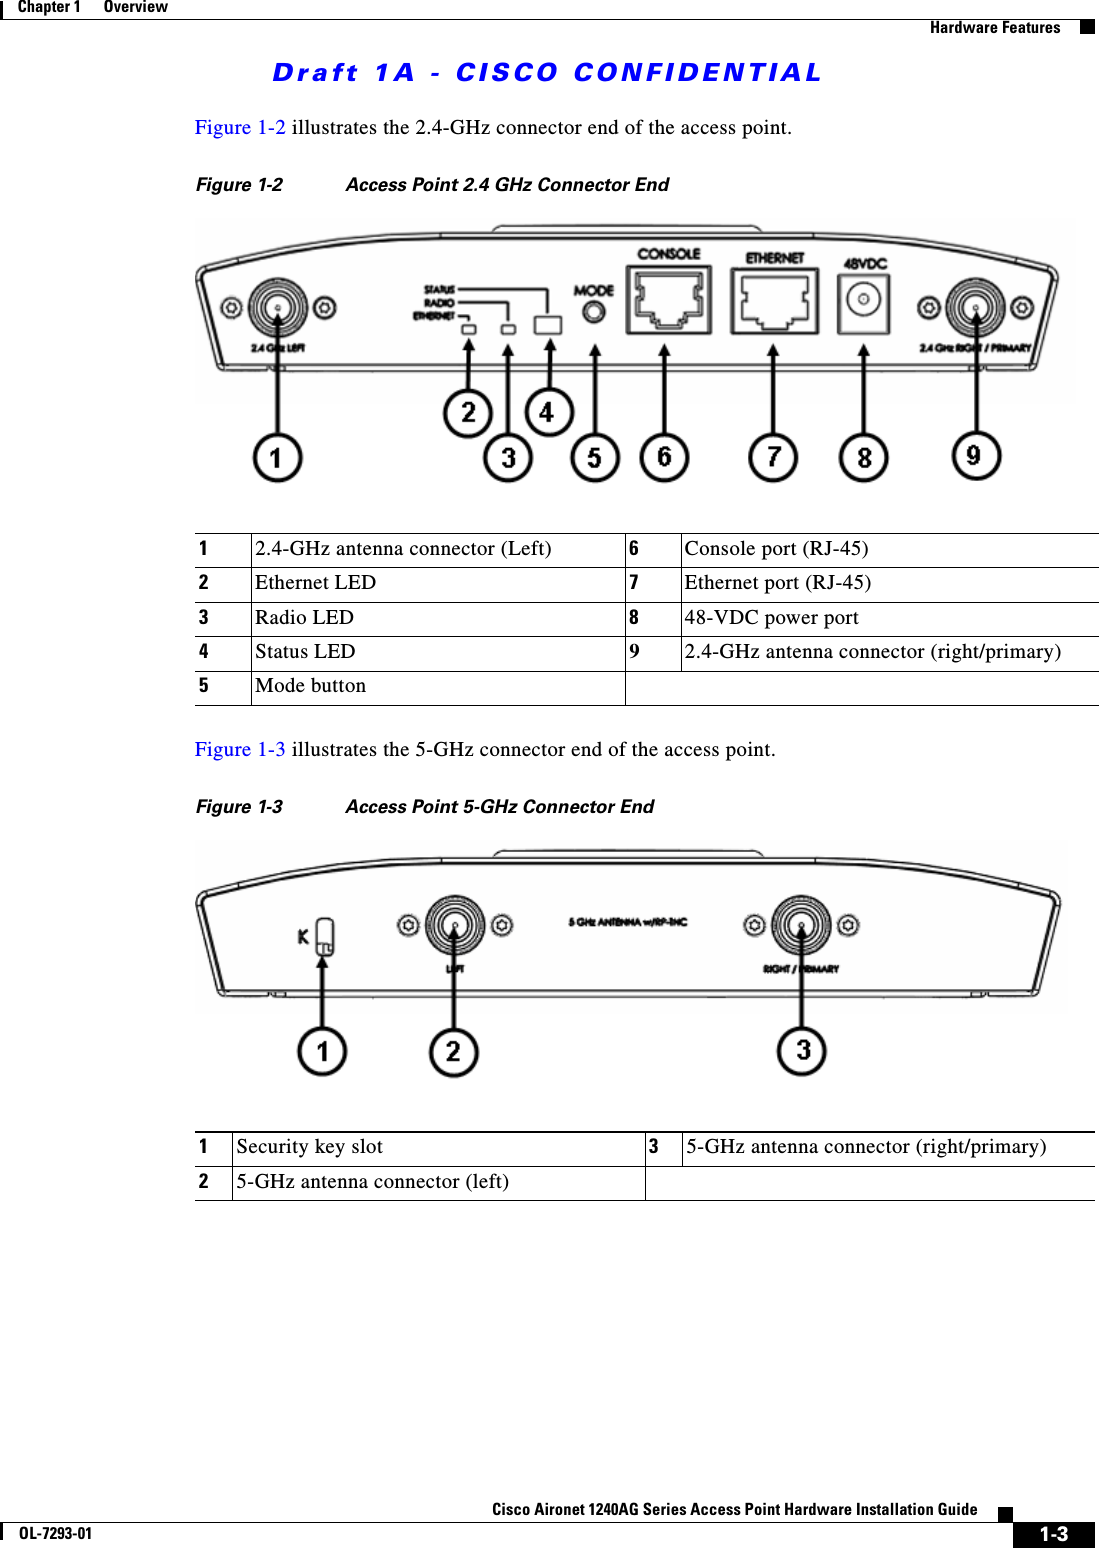 Draft 1A - CISCO CONFIDENTIAL1-3Cisco Aironet 1240AG Series Access Point Hardware Installation GuideOL-7293-01Chapter 1      OverviewHardware FeaturesFigure 1-2 illustrates the 2.4-GHz connector end of the access point.Figure 1-2 Access Point 2.4 GHz Connector EndFigure 1-3 illustrates the 5-GHz connector end of the access point.Figure 1-3 Access Point 5-GHz Connector End12.4-GHz antenna connector (Left) 6Console port (RJ-45)2Ethernet LED 7Ethernet port (RJ-45)3Radio LED 848-VDC power port4Status LED 92.4-GHz antenna connector (right/primary)5Mode button1Security key slot 35-GHz antenna connector (right/primary)25-GHz antenna connector (left)